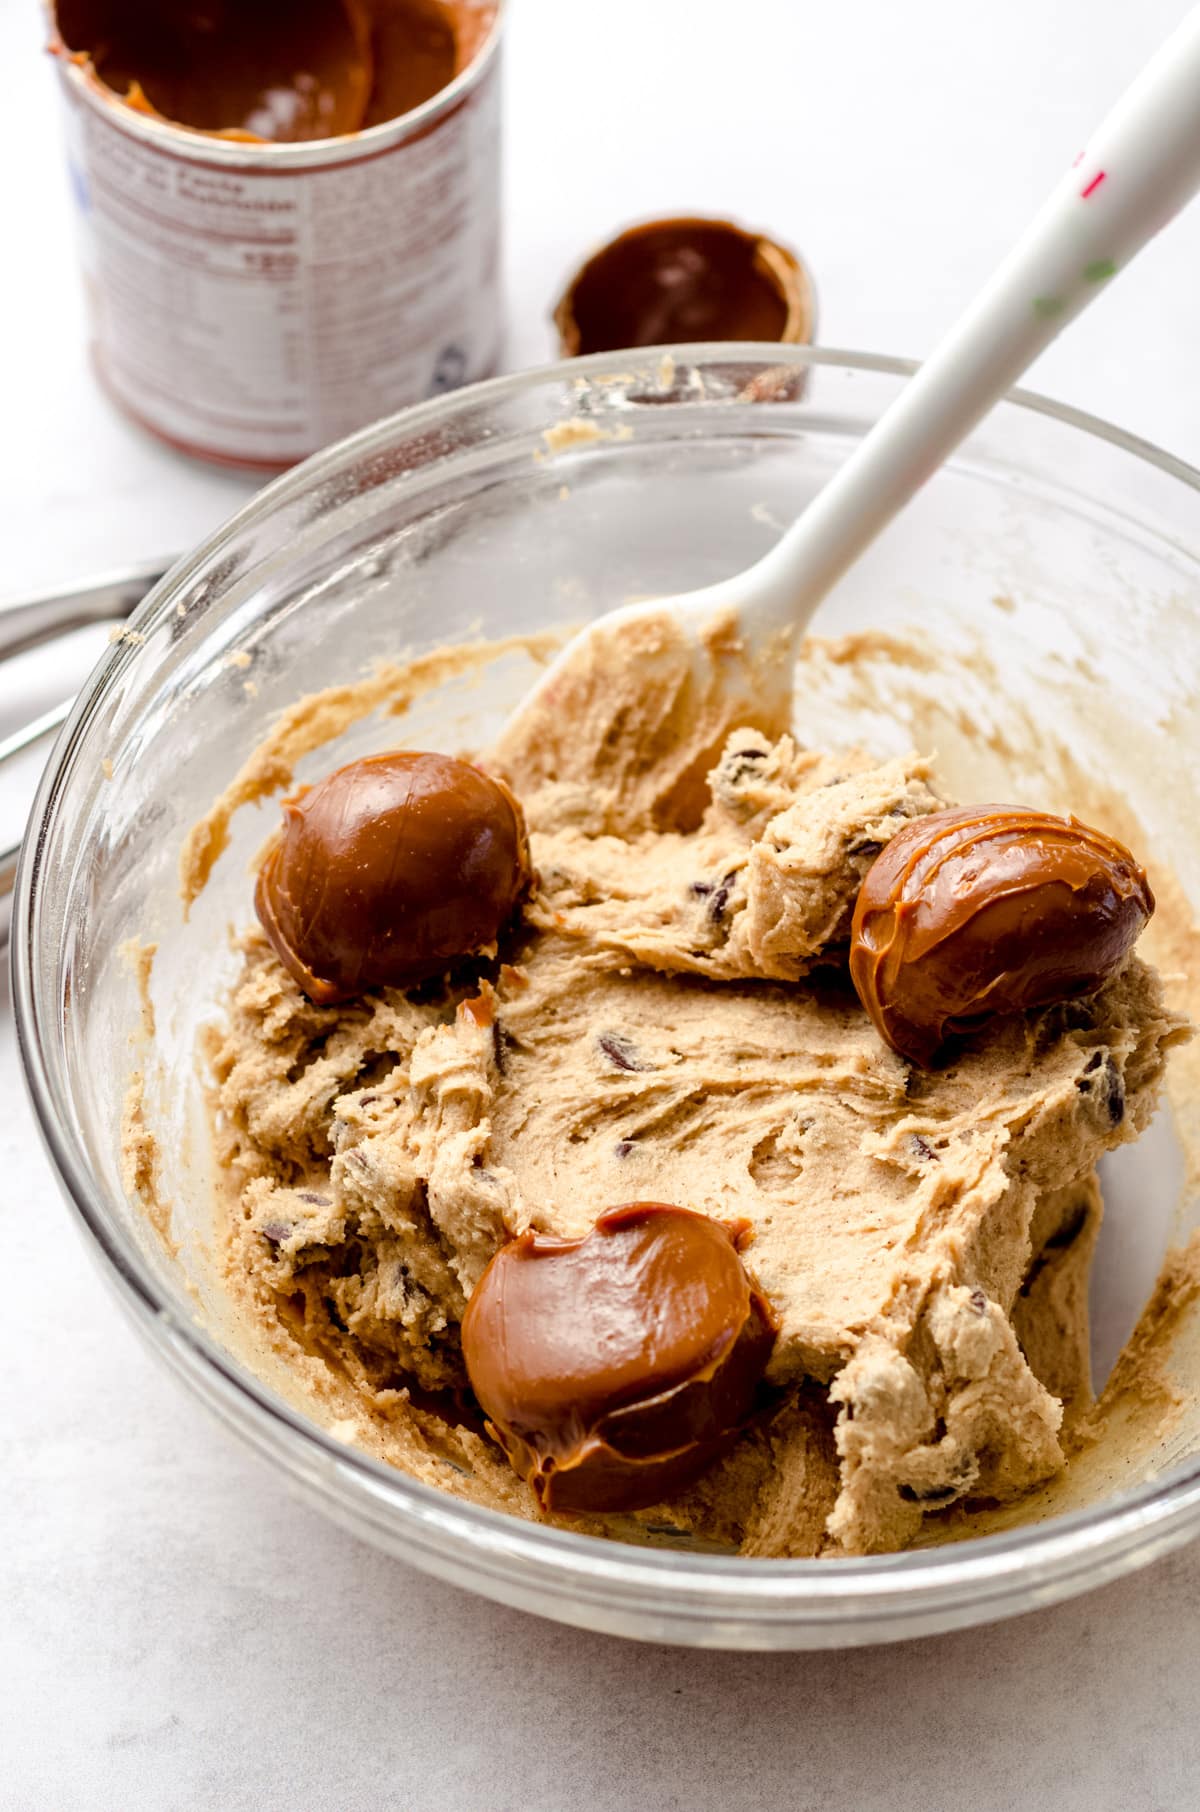 A base cookie dough with 3 large dollops of dulce de leche spread out.